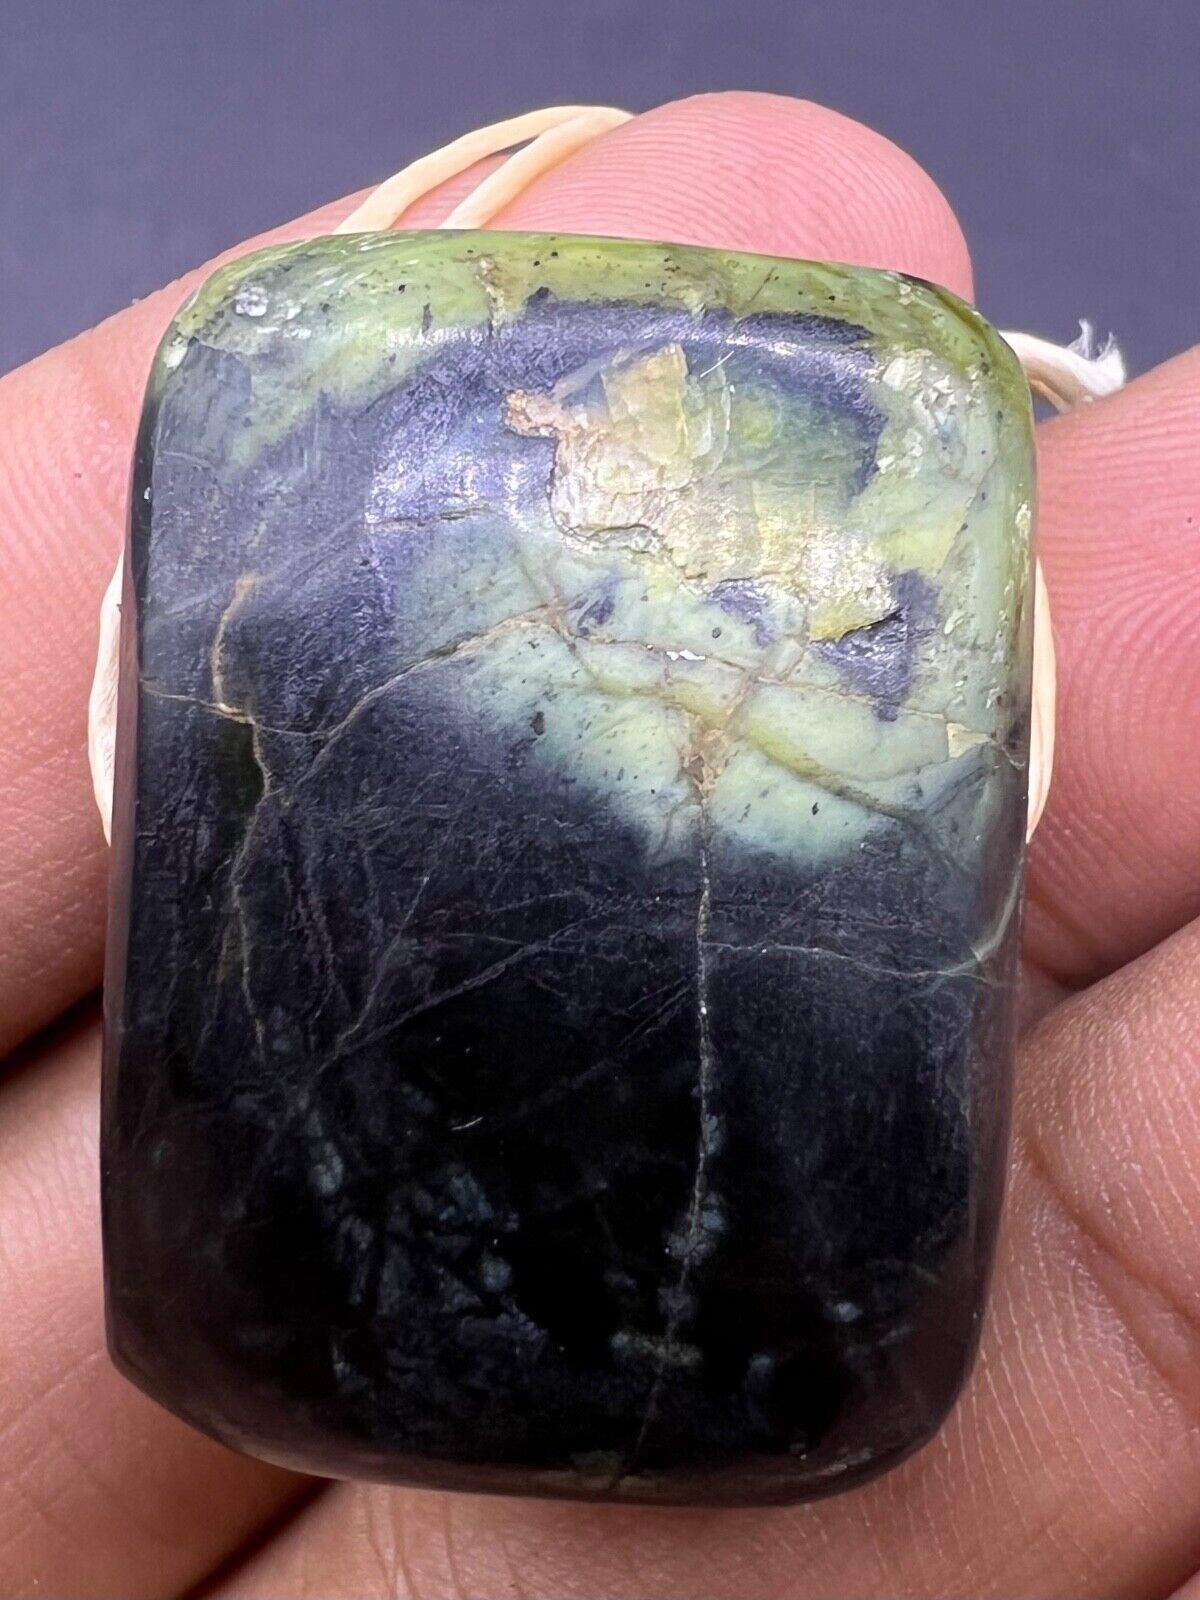 Rare Authentic Old Natural Nephrite Jade Stone Bead From Central Asia